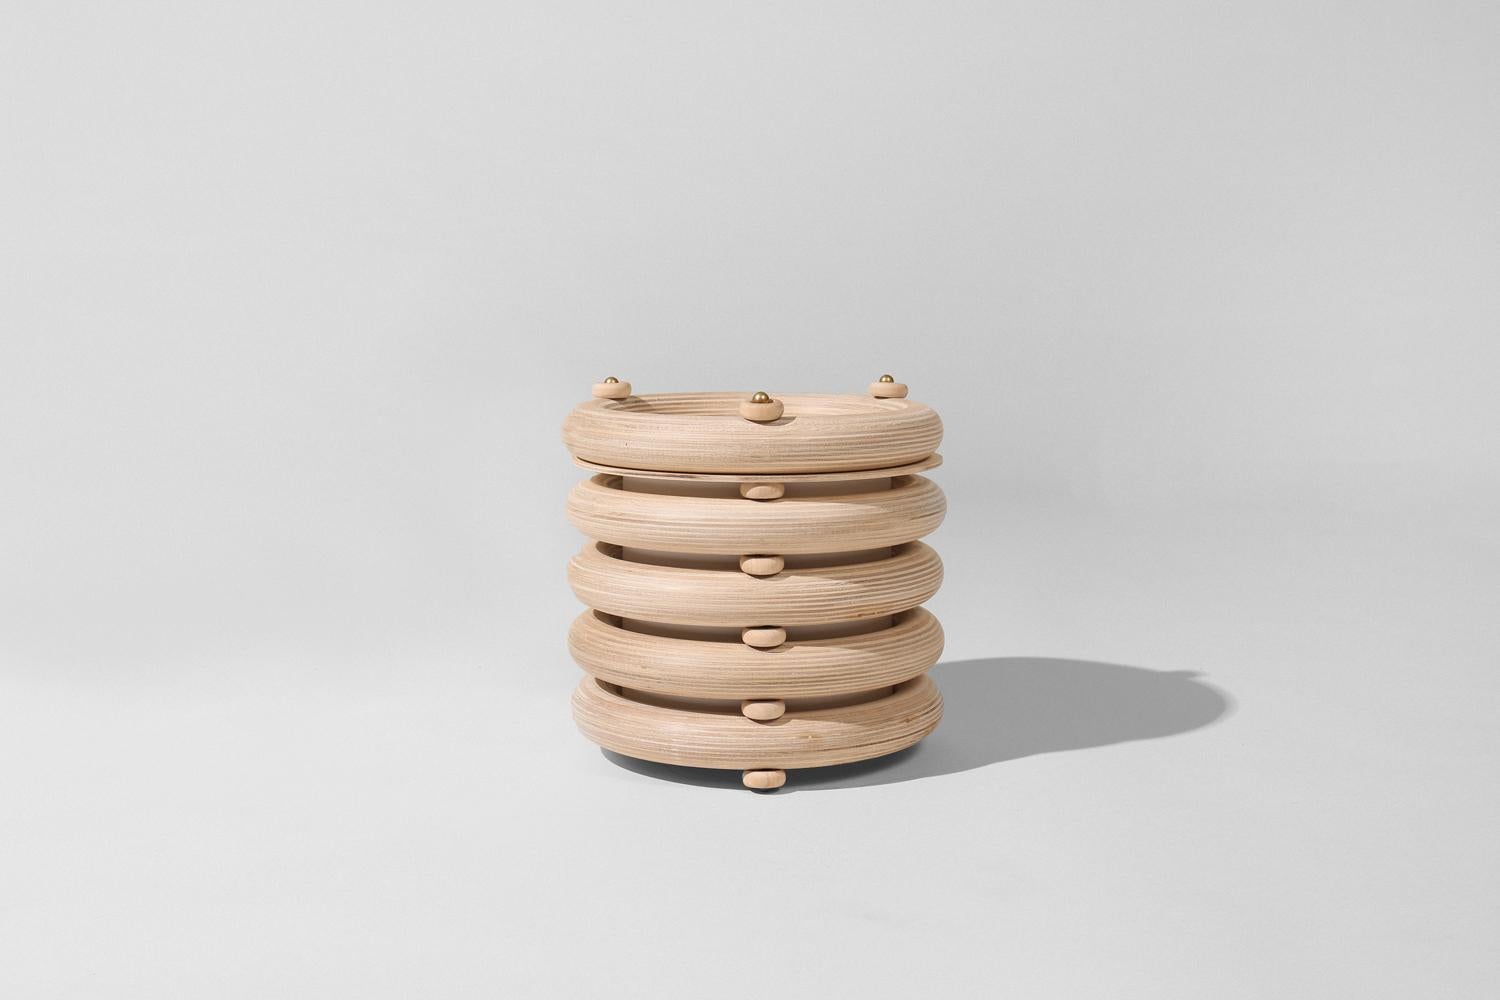 The Echo family of sculptural totems pairs tropical warmth with minimalist appeal. Made of stacked finely finished birch, the totems have an architectural rigidity and a soft visual appeal. The Echo Totem lights are the same sculpture as the